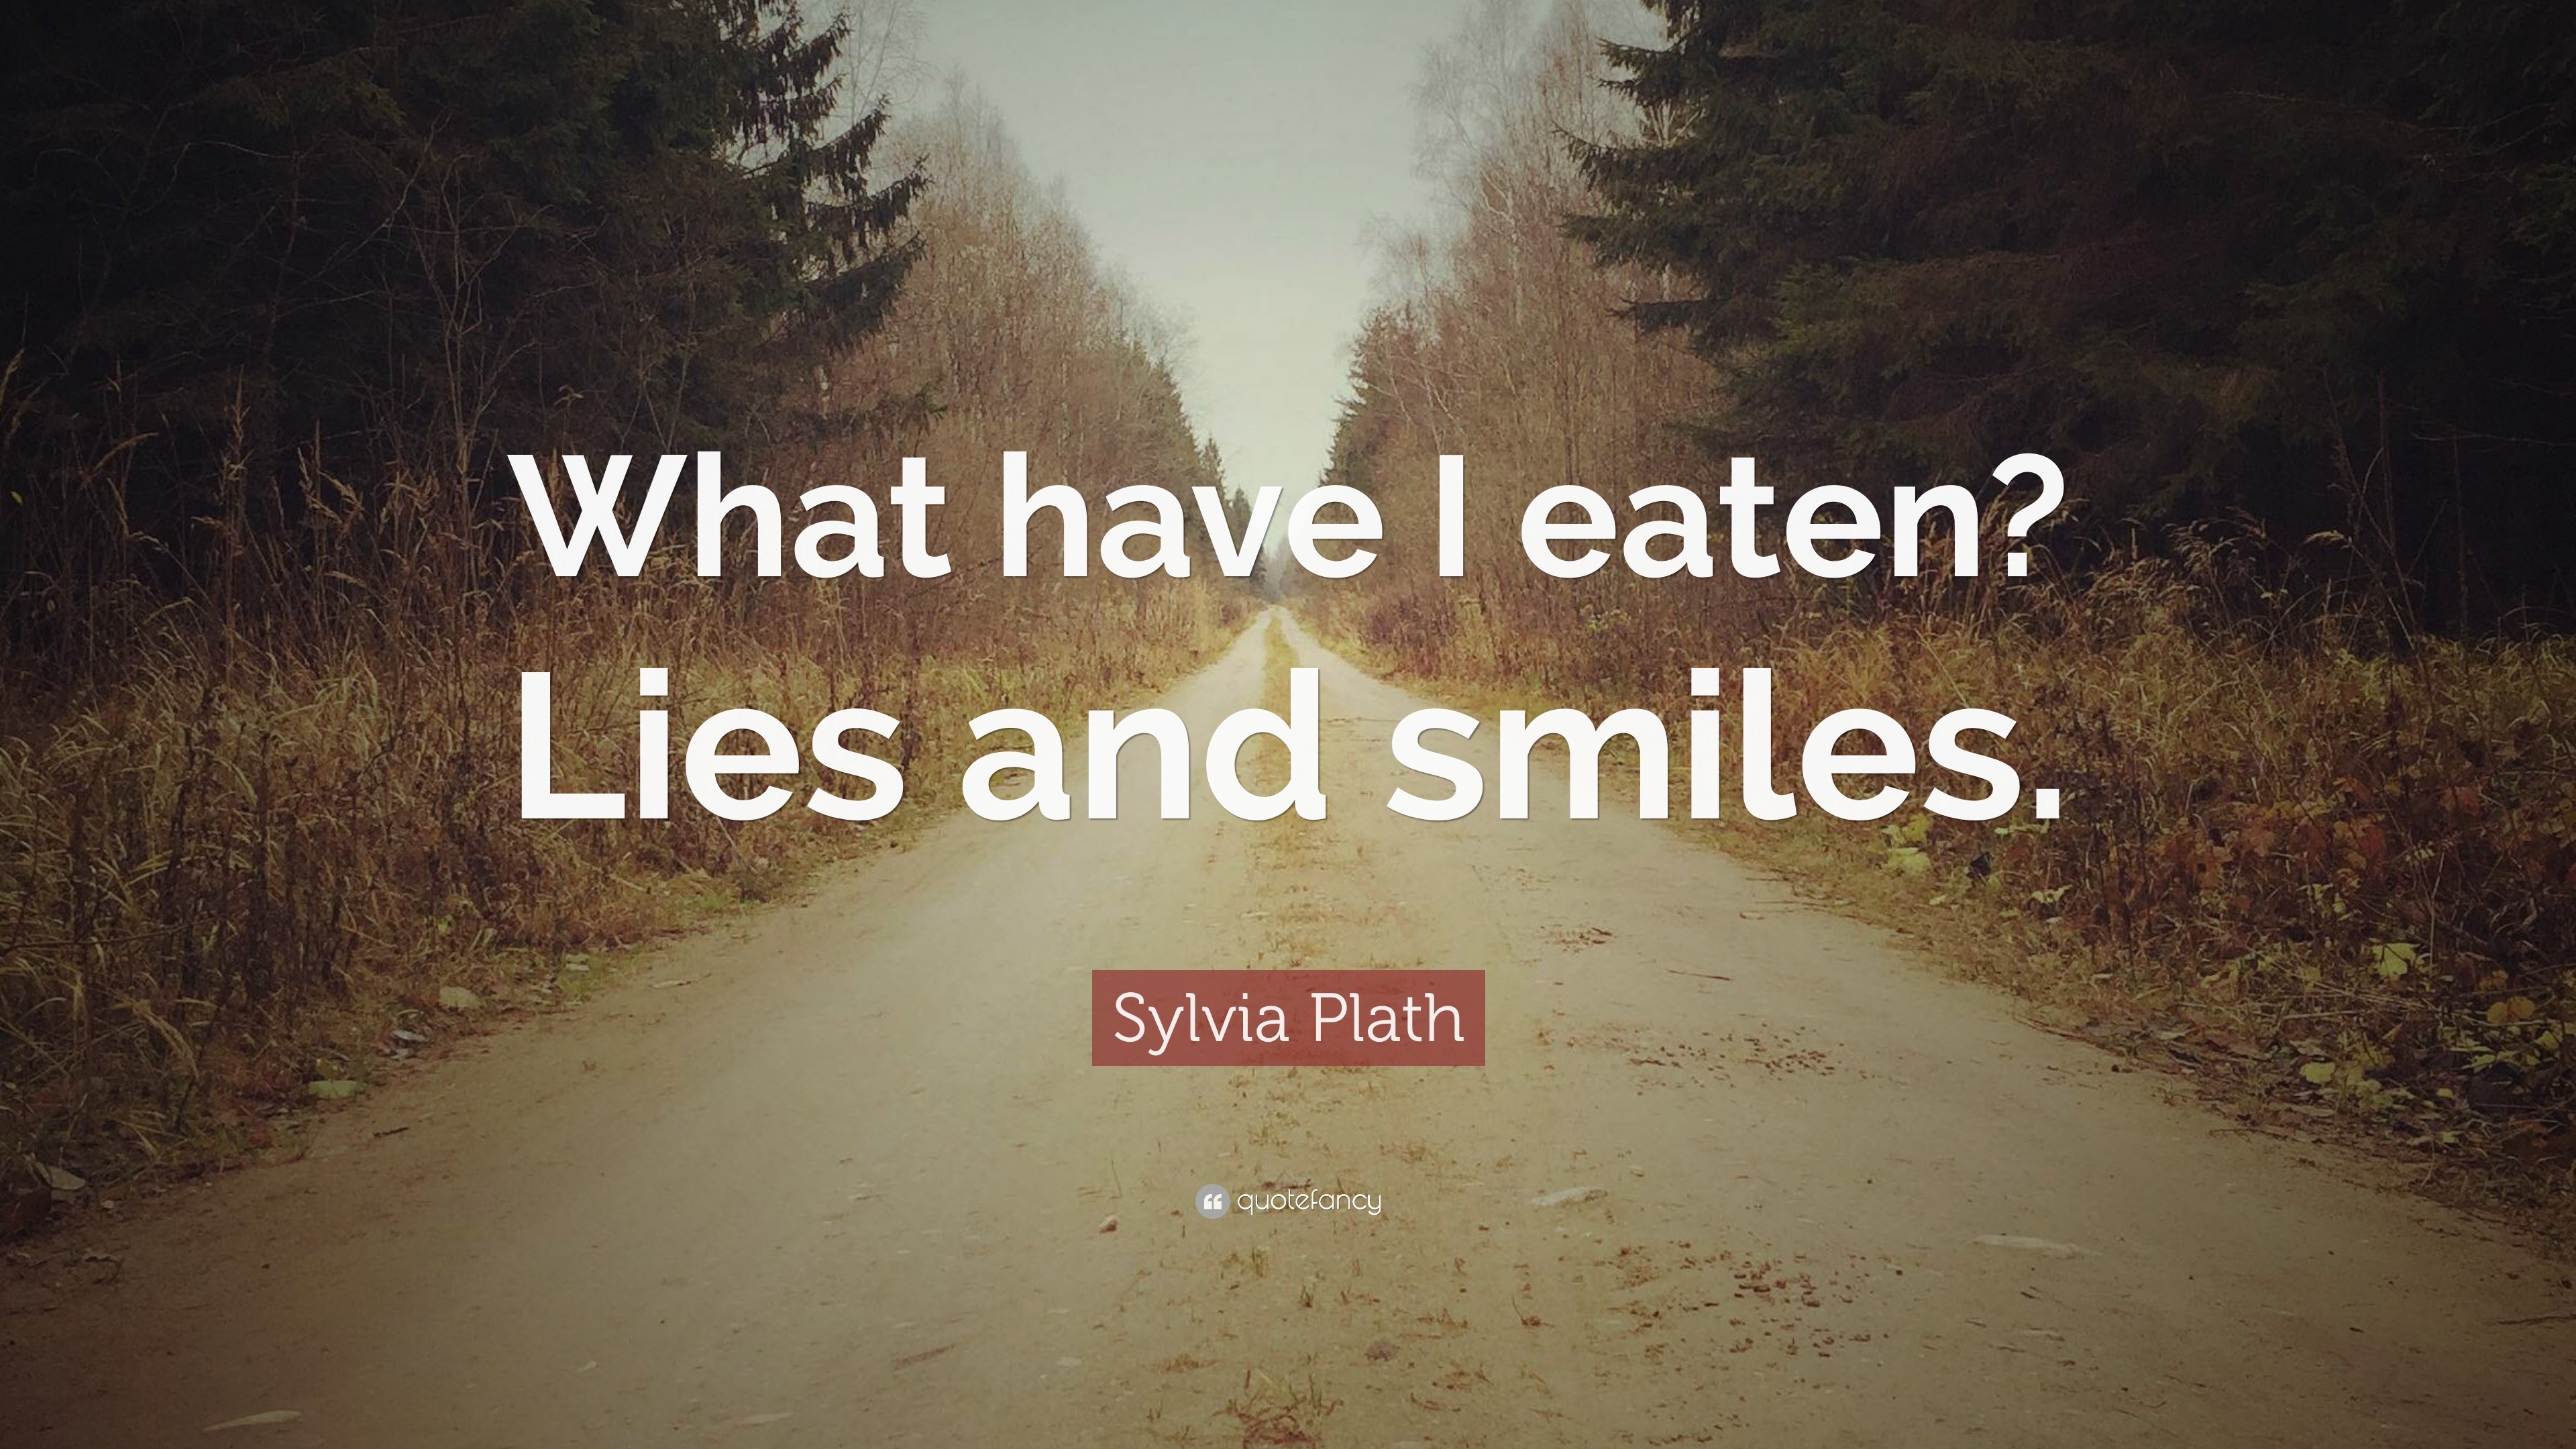 Sylvia Plath Quote: “What have I eaten? Lies and smiles.”